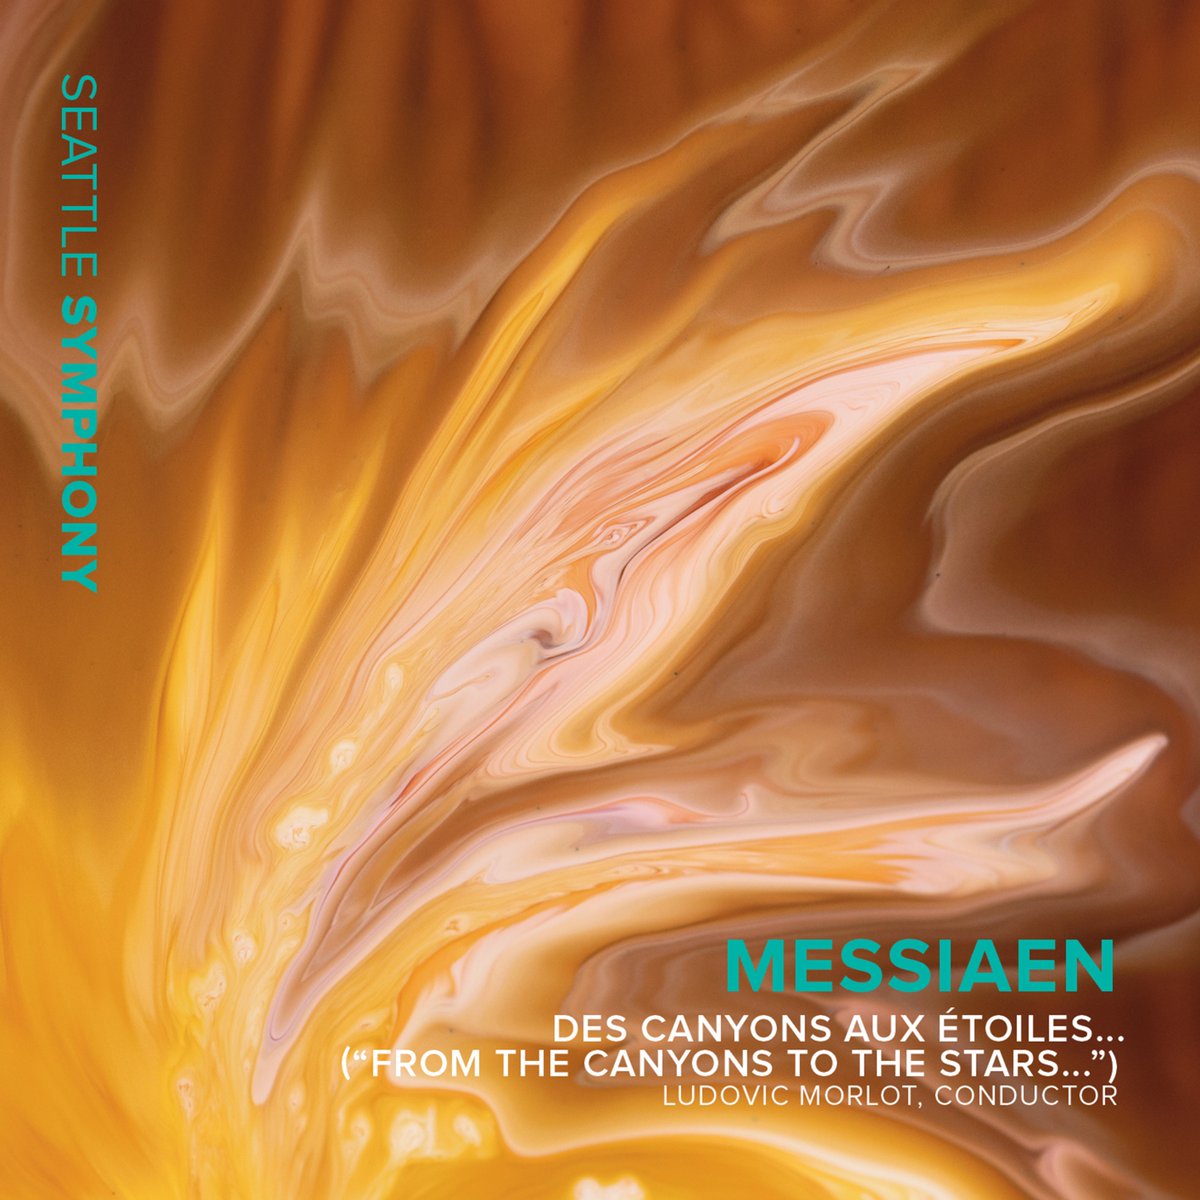 Today we're listening to Des canyons aux étoiles, a twelve-movement orchestral work by the French composer Olivier Messiaen: apple.co/Messiaen- 🎵